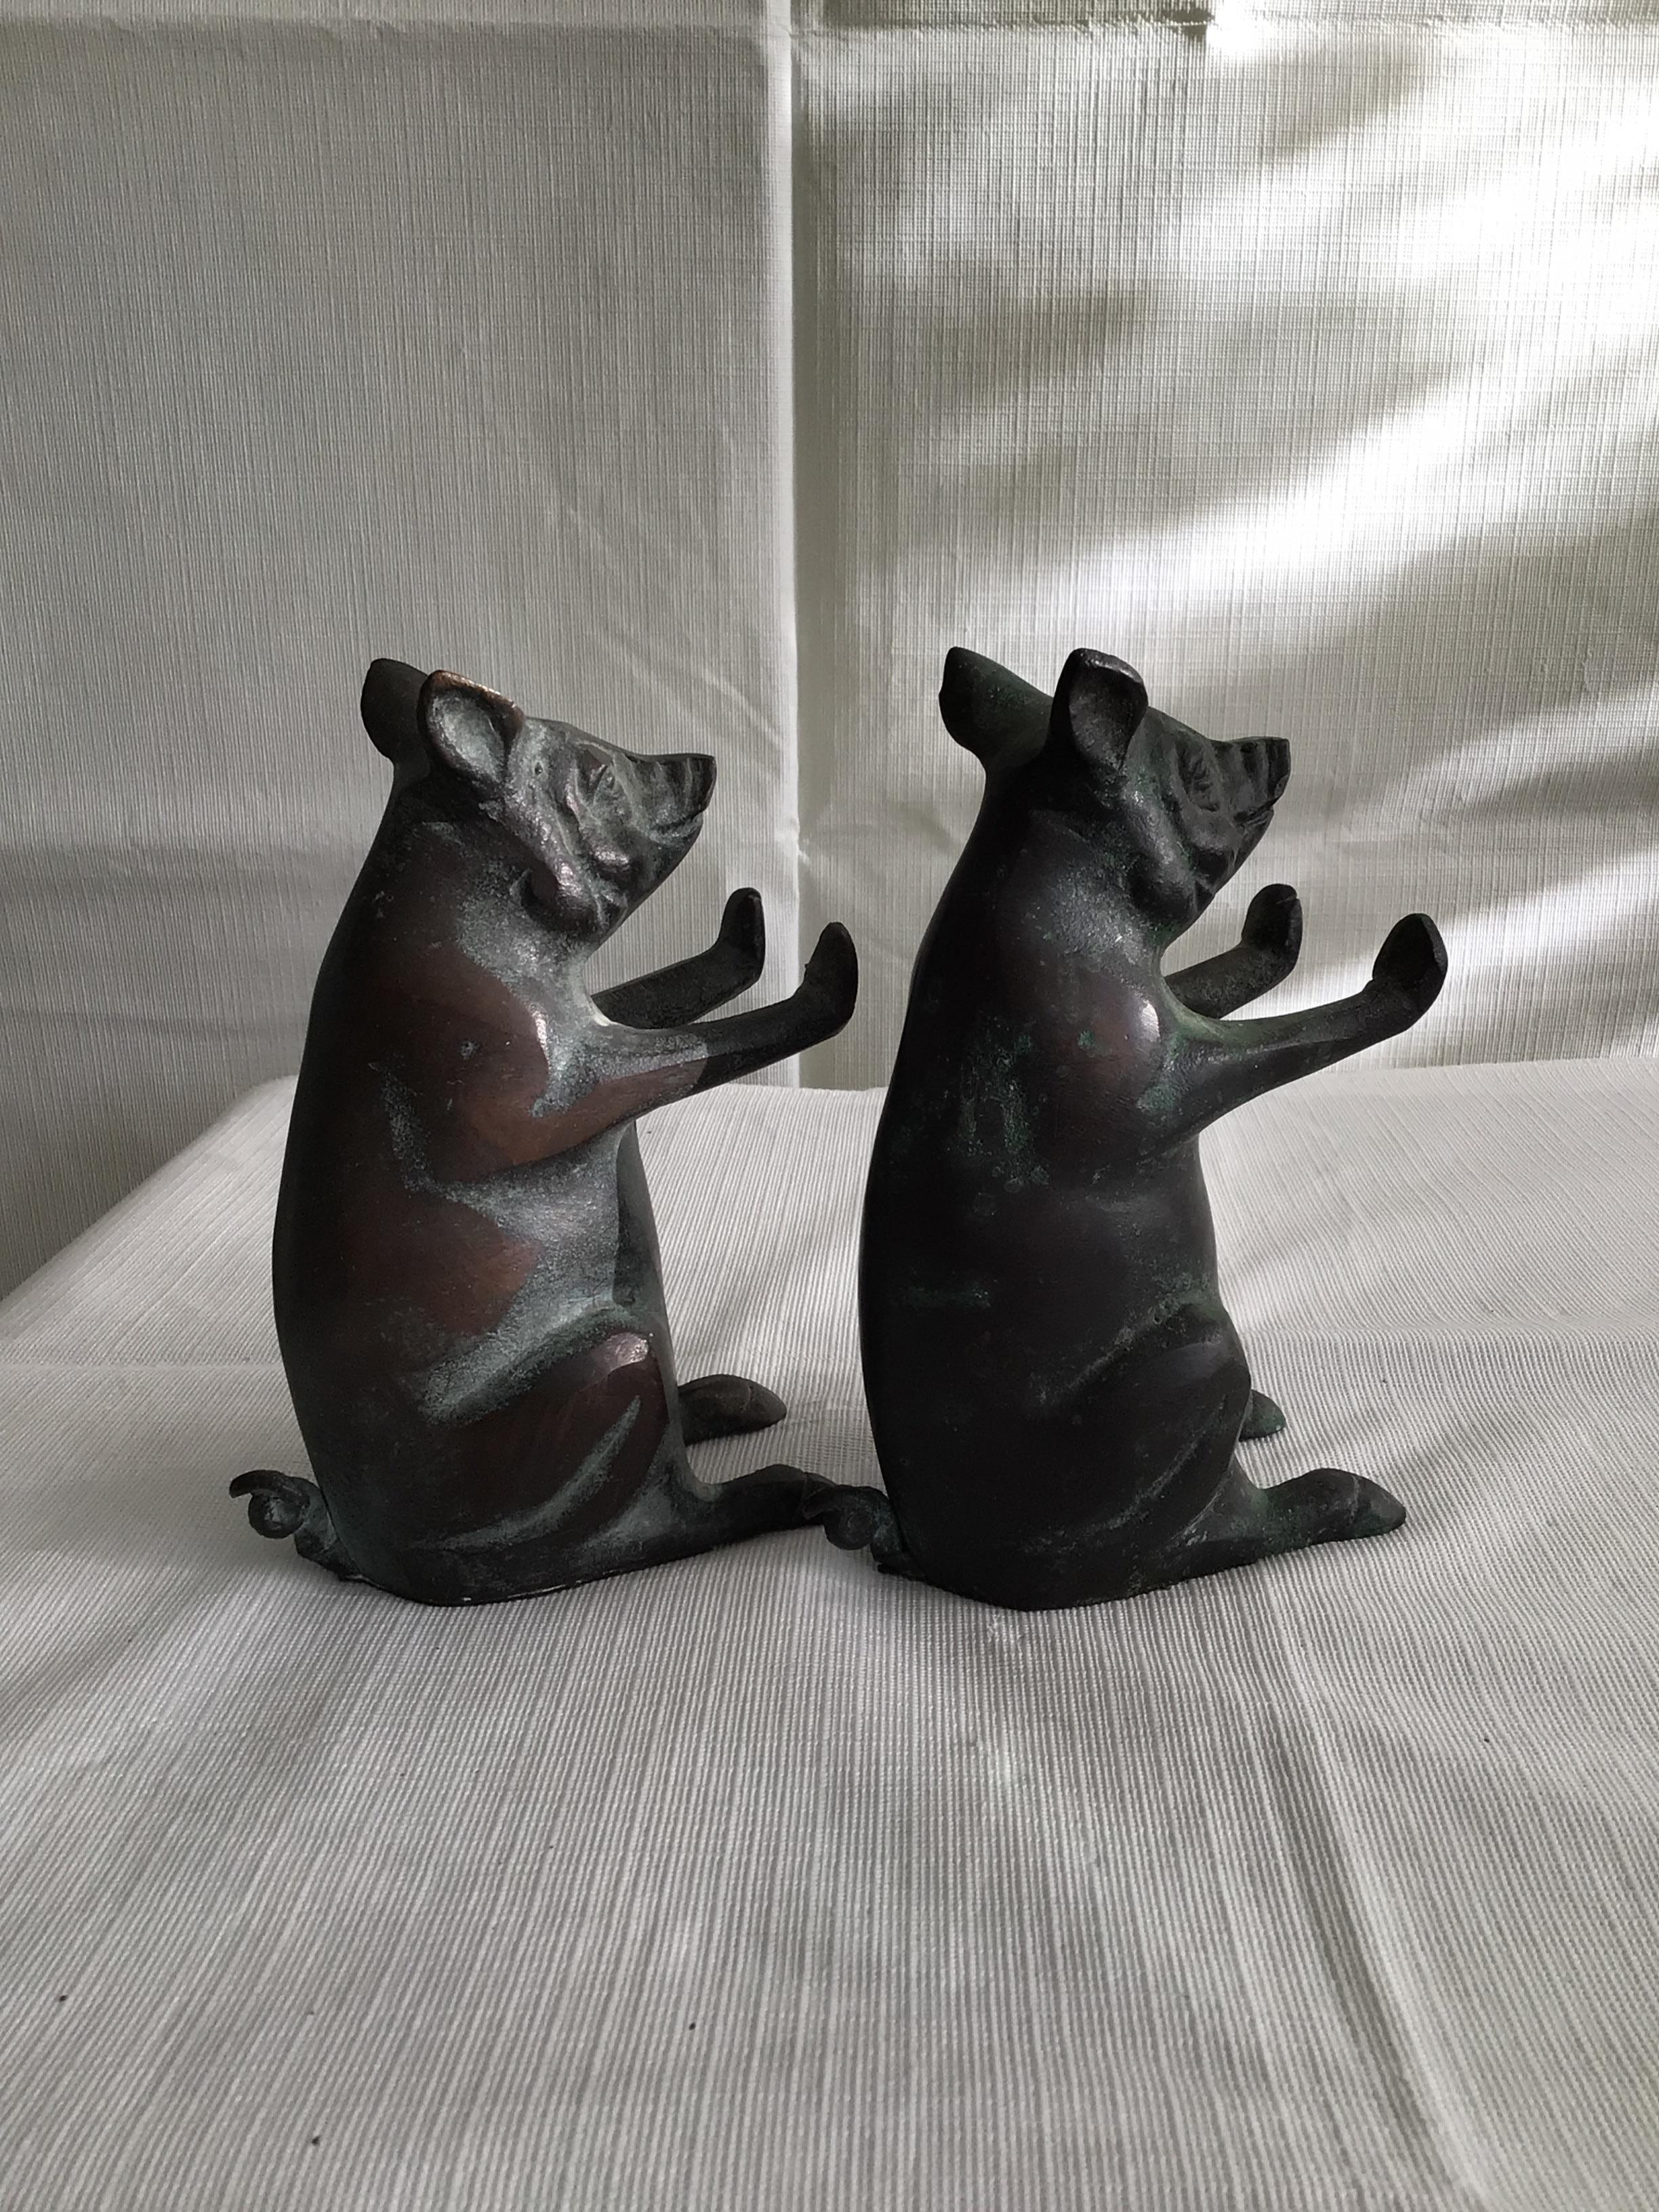 pig book ends